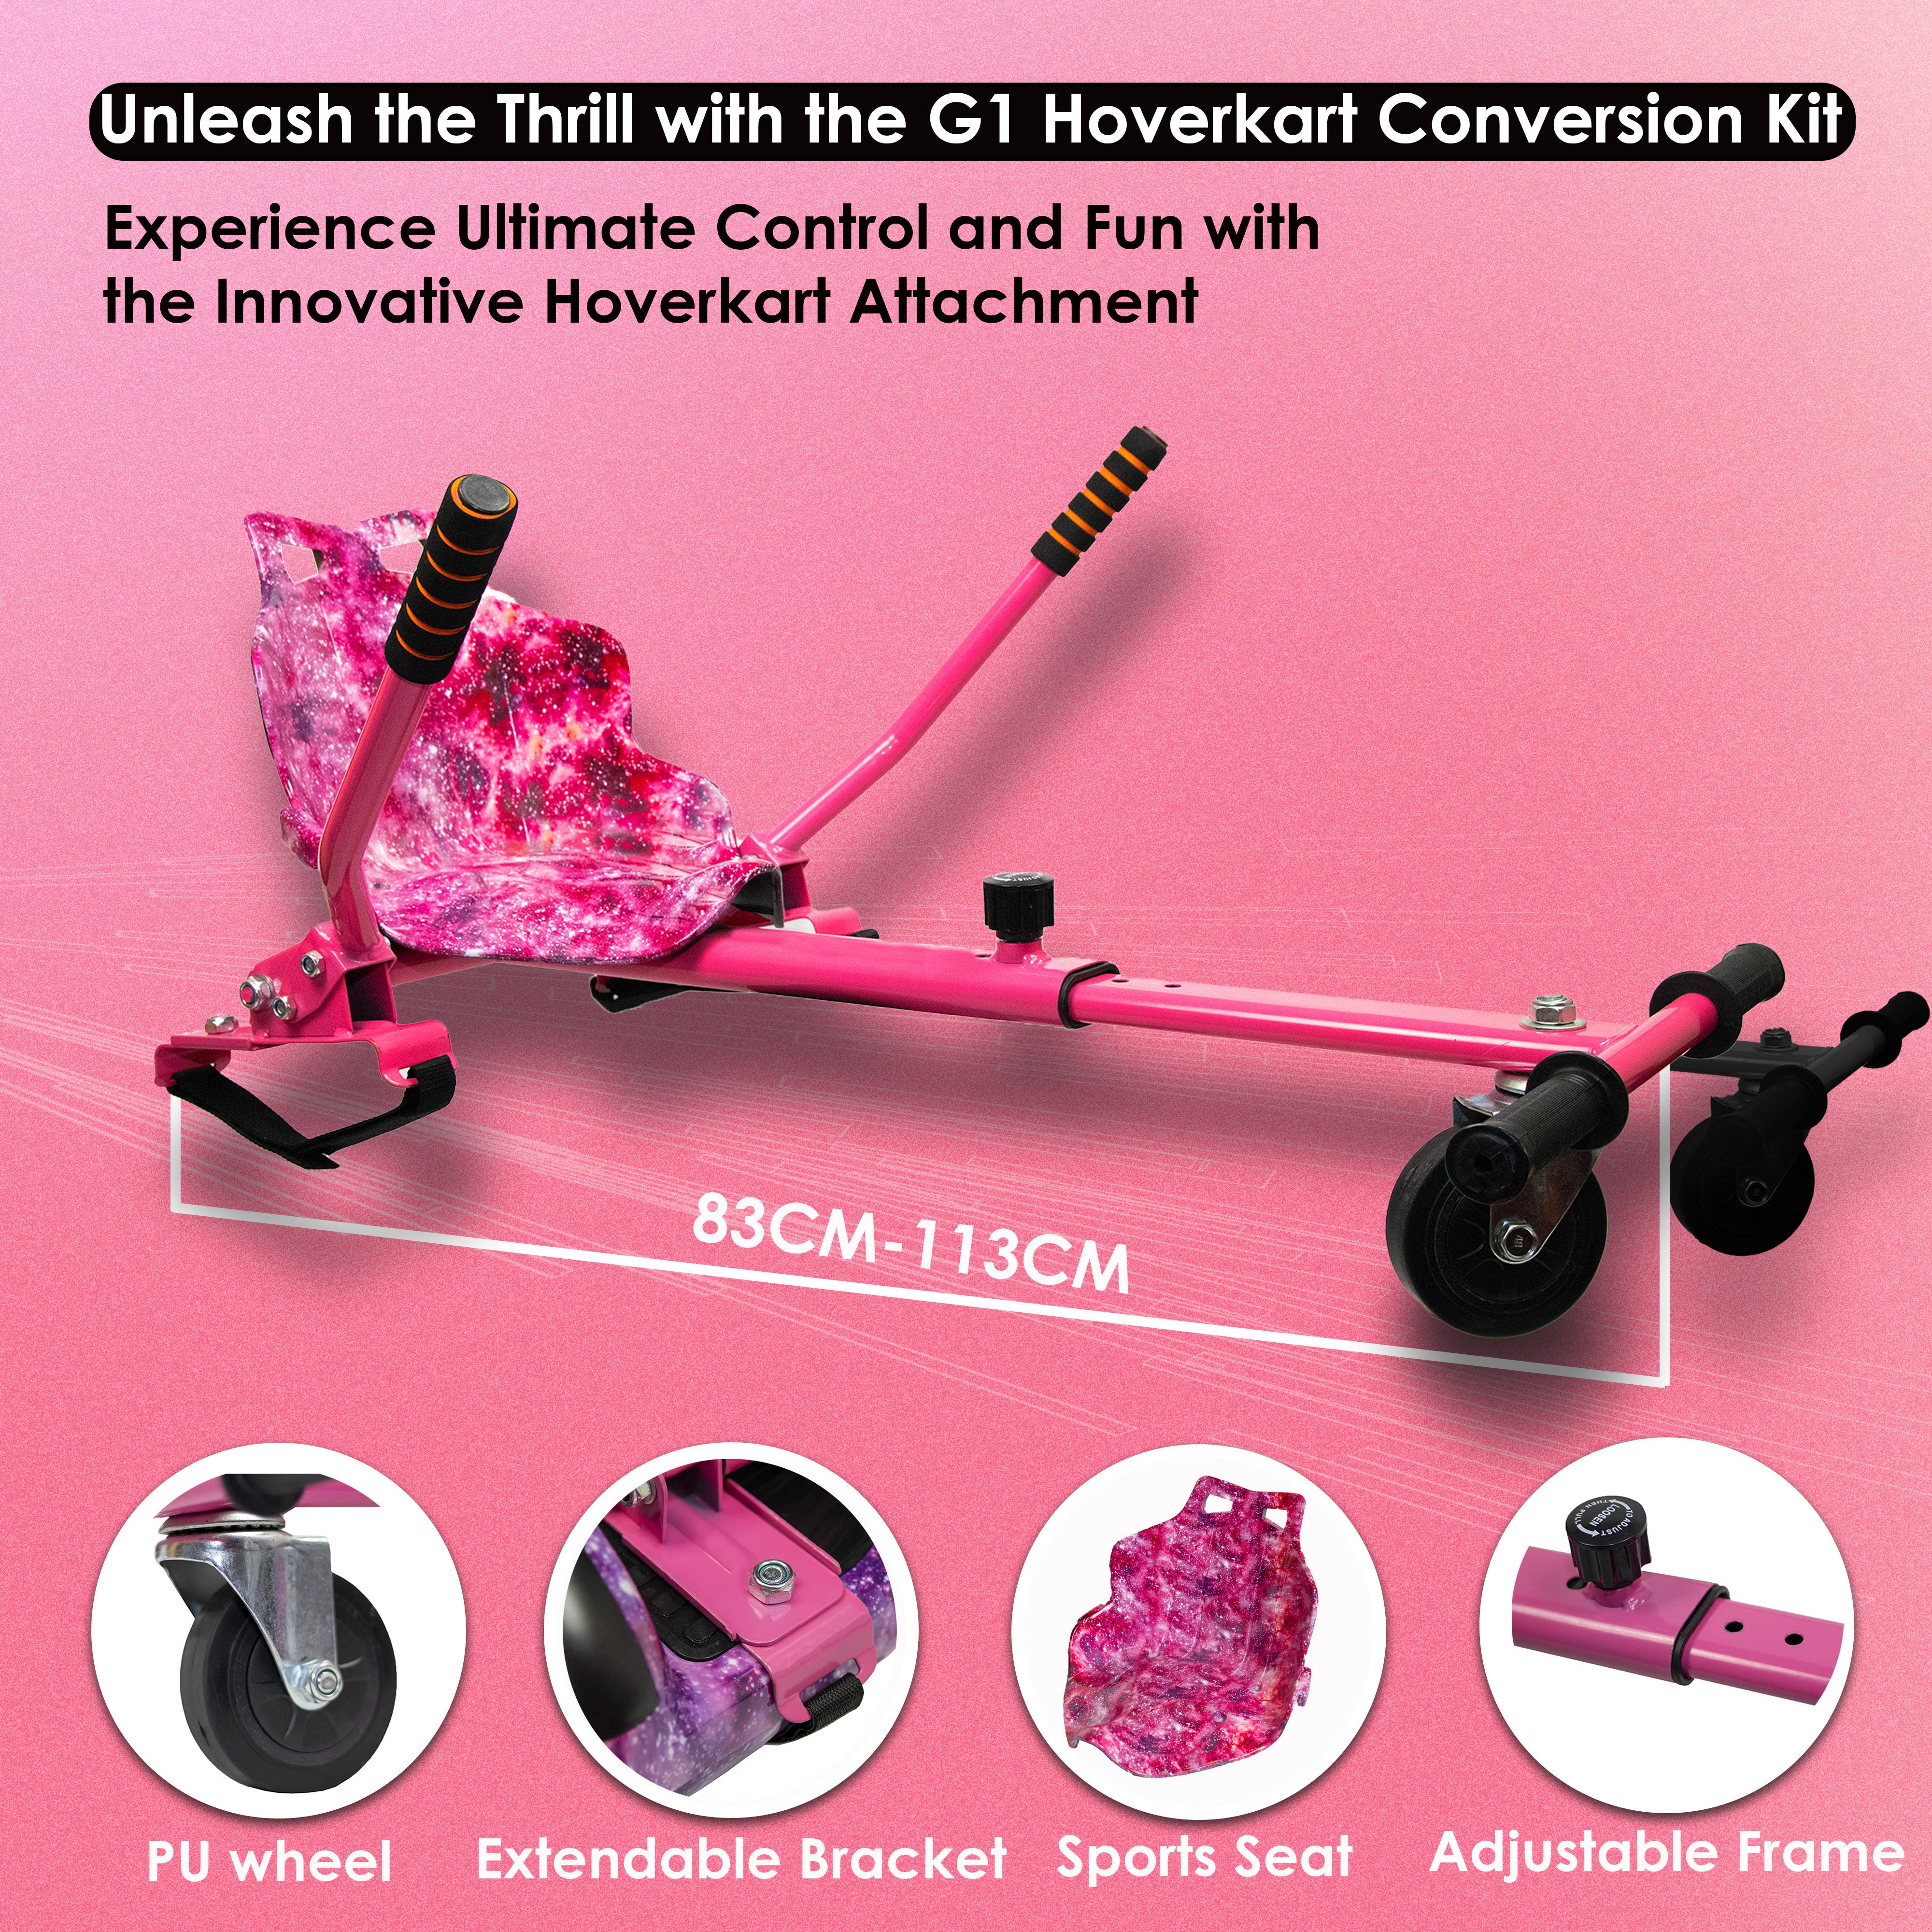 Pink R1 hoverkart conversion kit with extendable frame and PU wheels for versatile hoverboard attachment